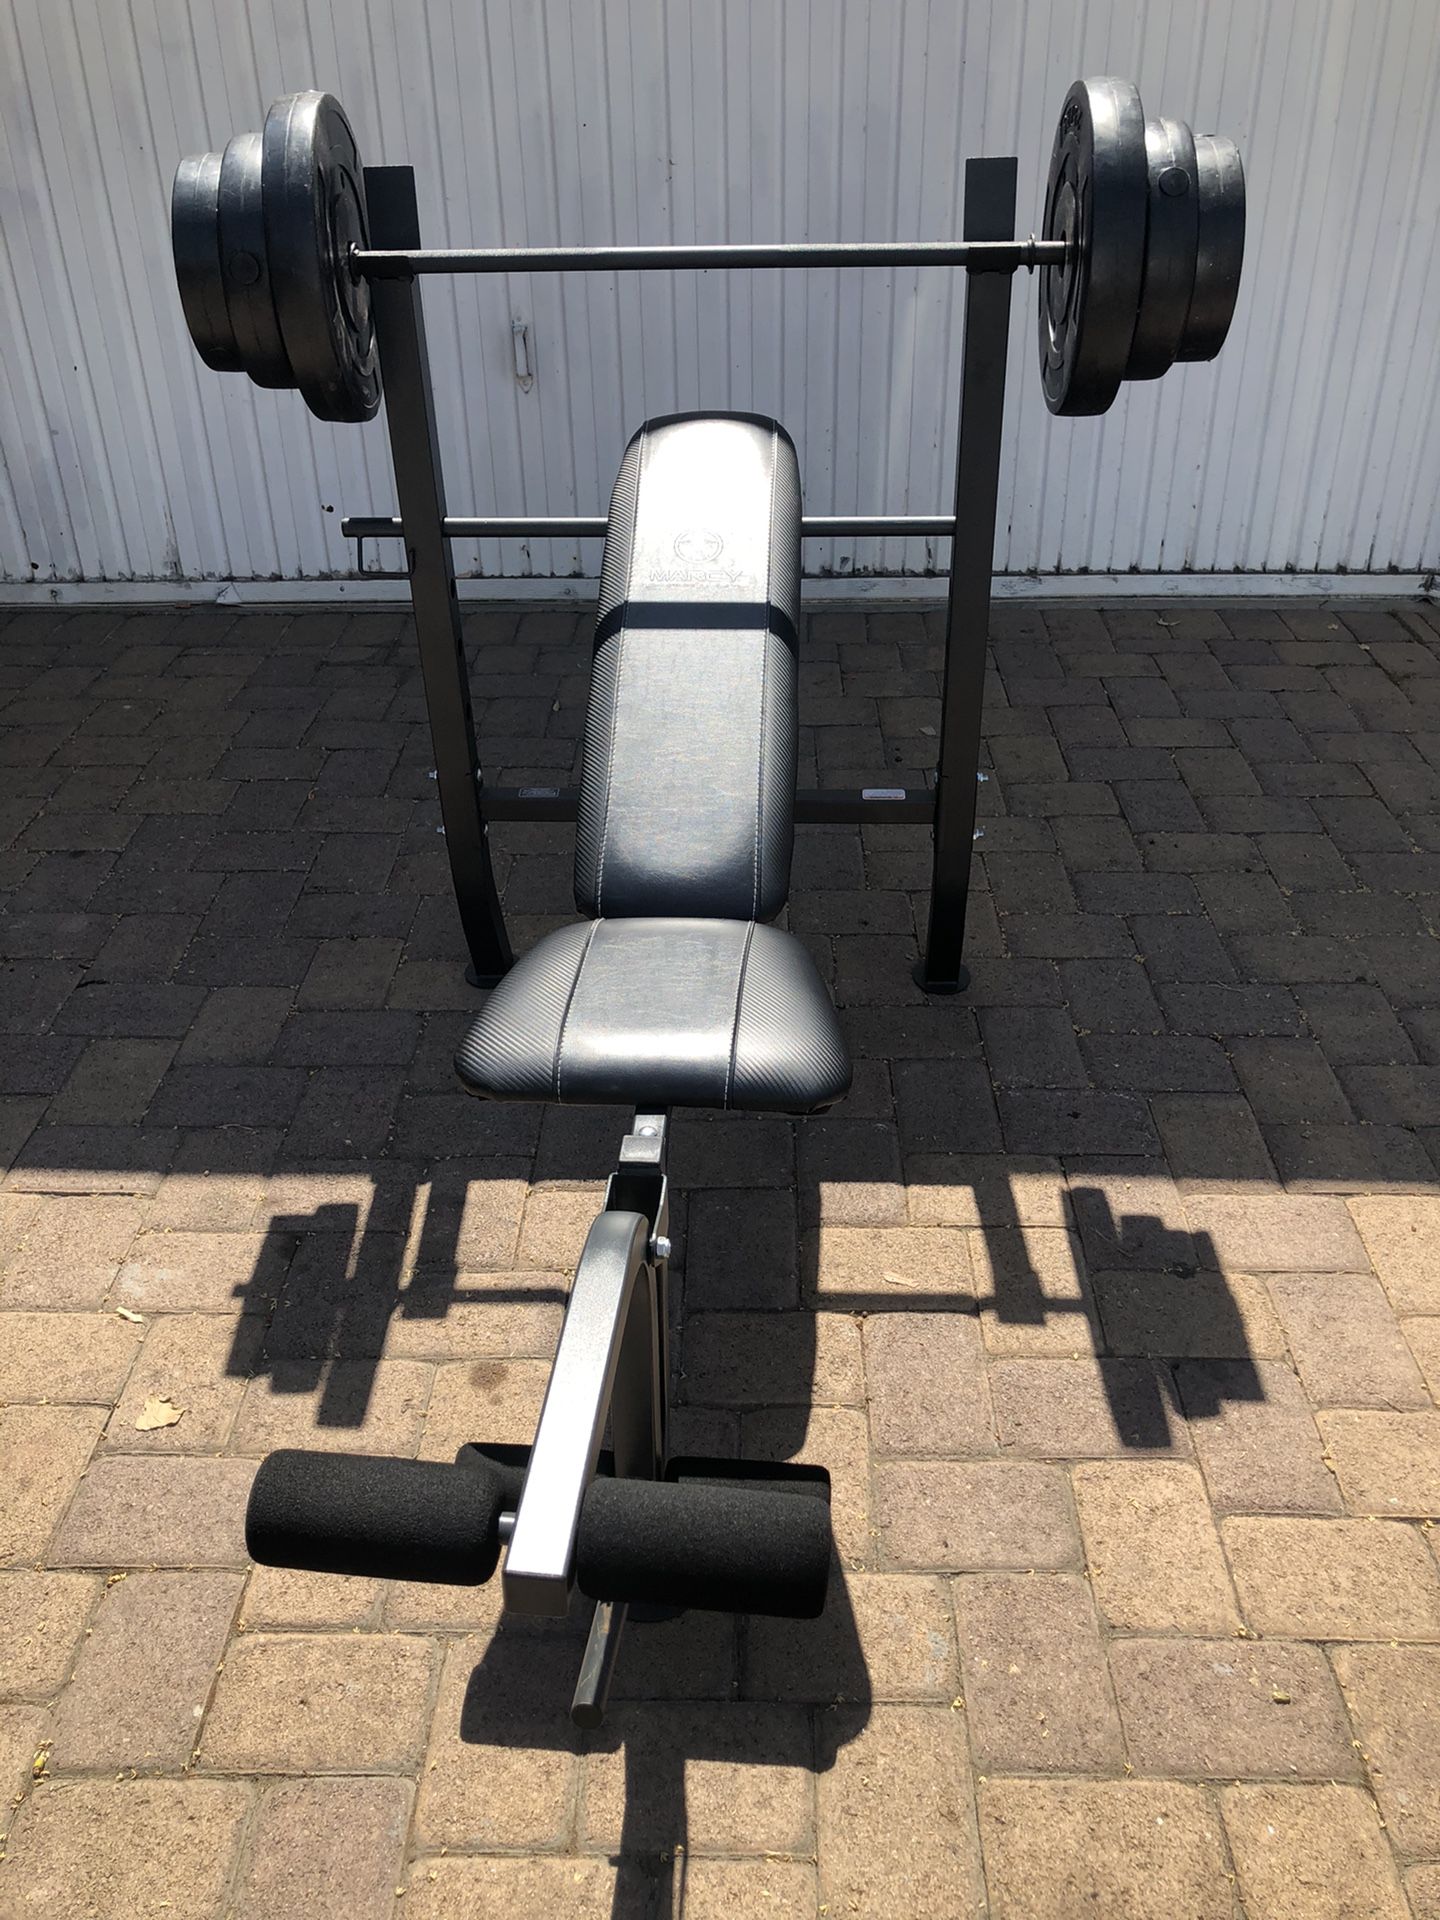 Bench press with Barbell and 100 lb Weight Set brand new all included